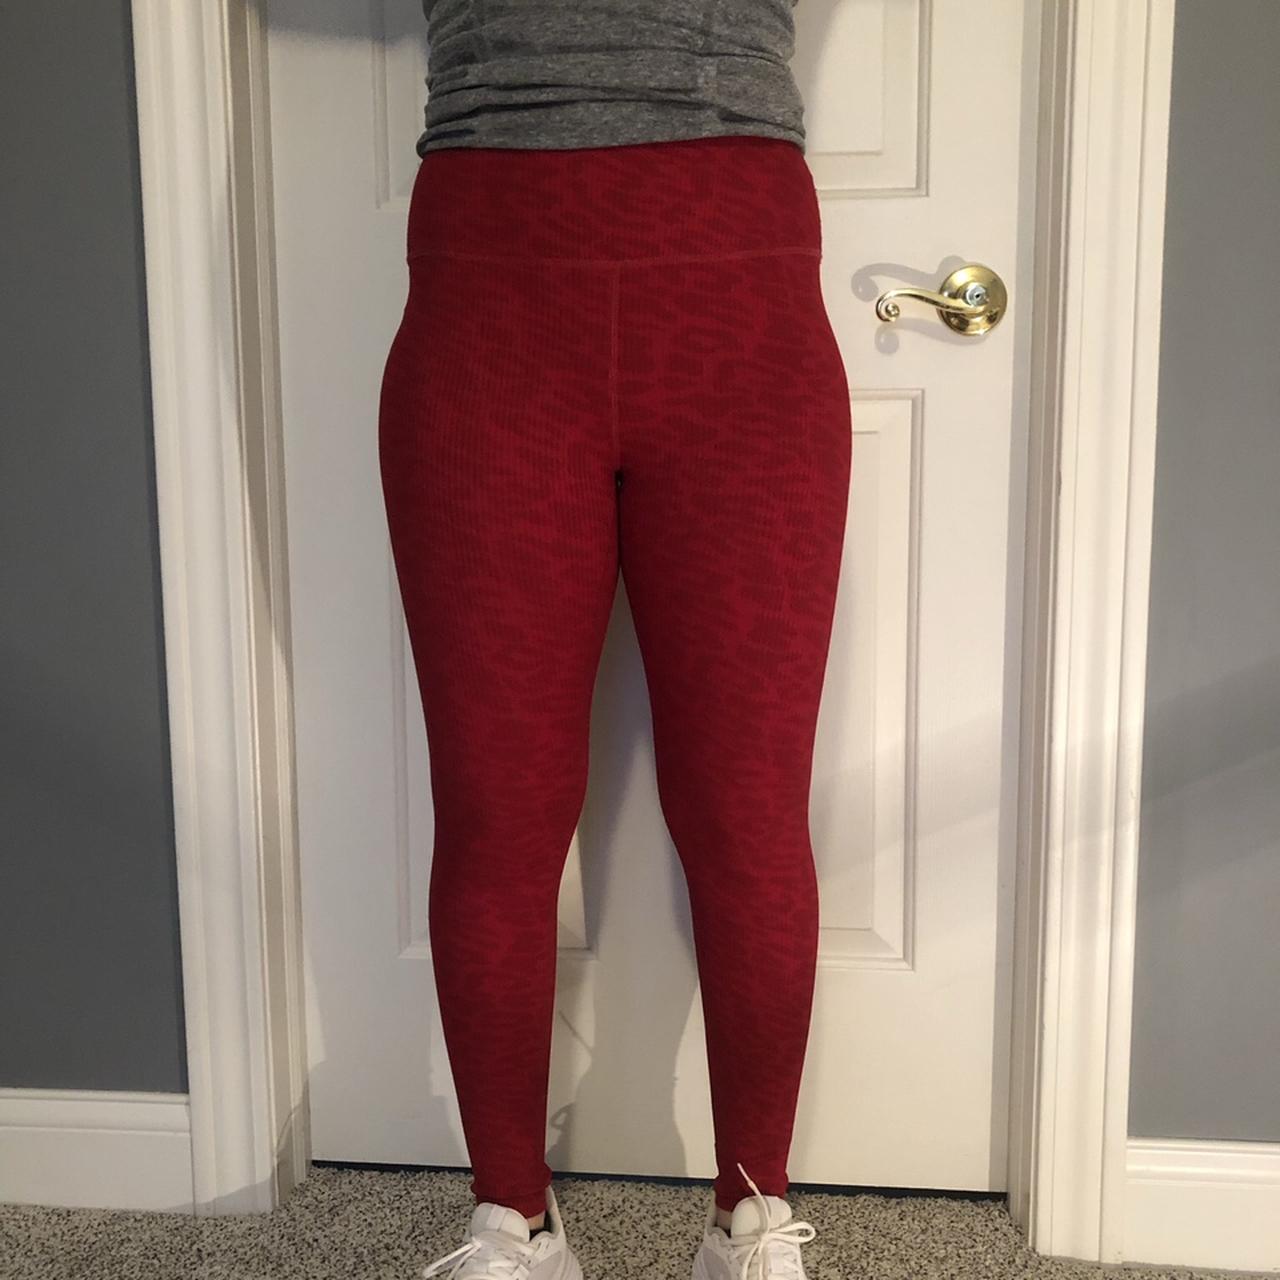 Carbon 38 ribbed high-rise 7/8 Red leggings Size: - Depop